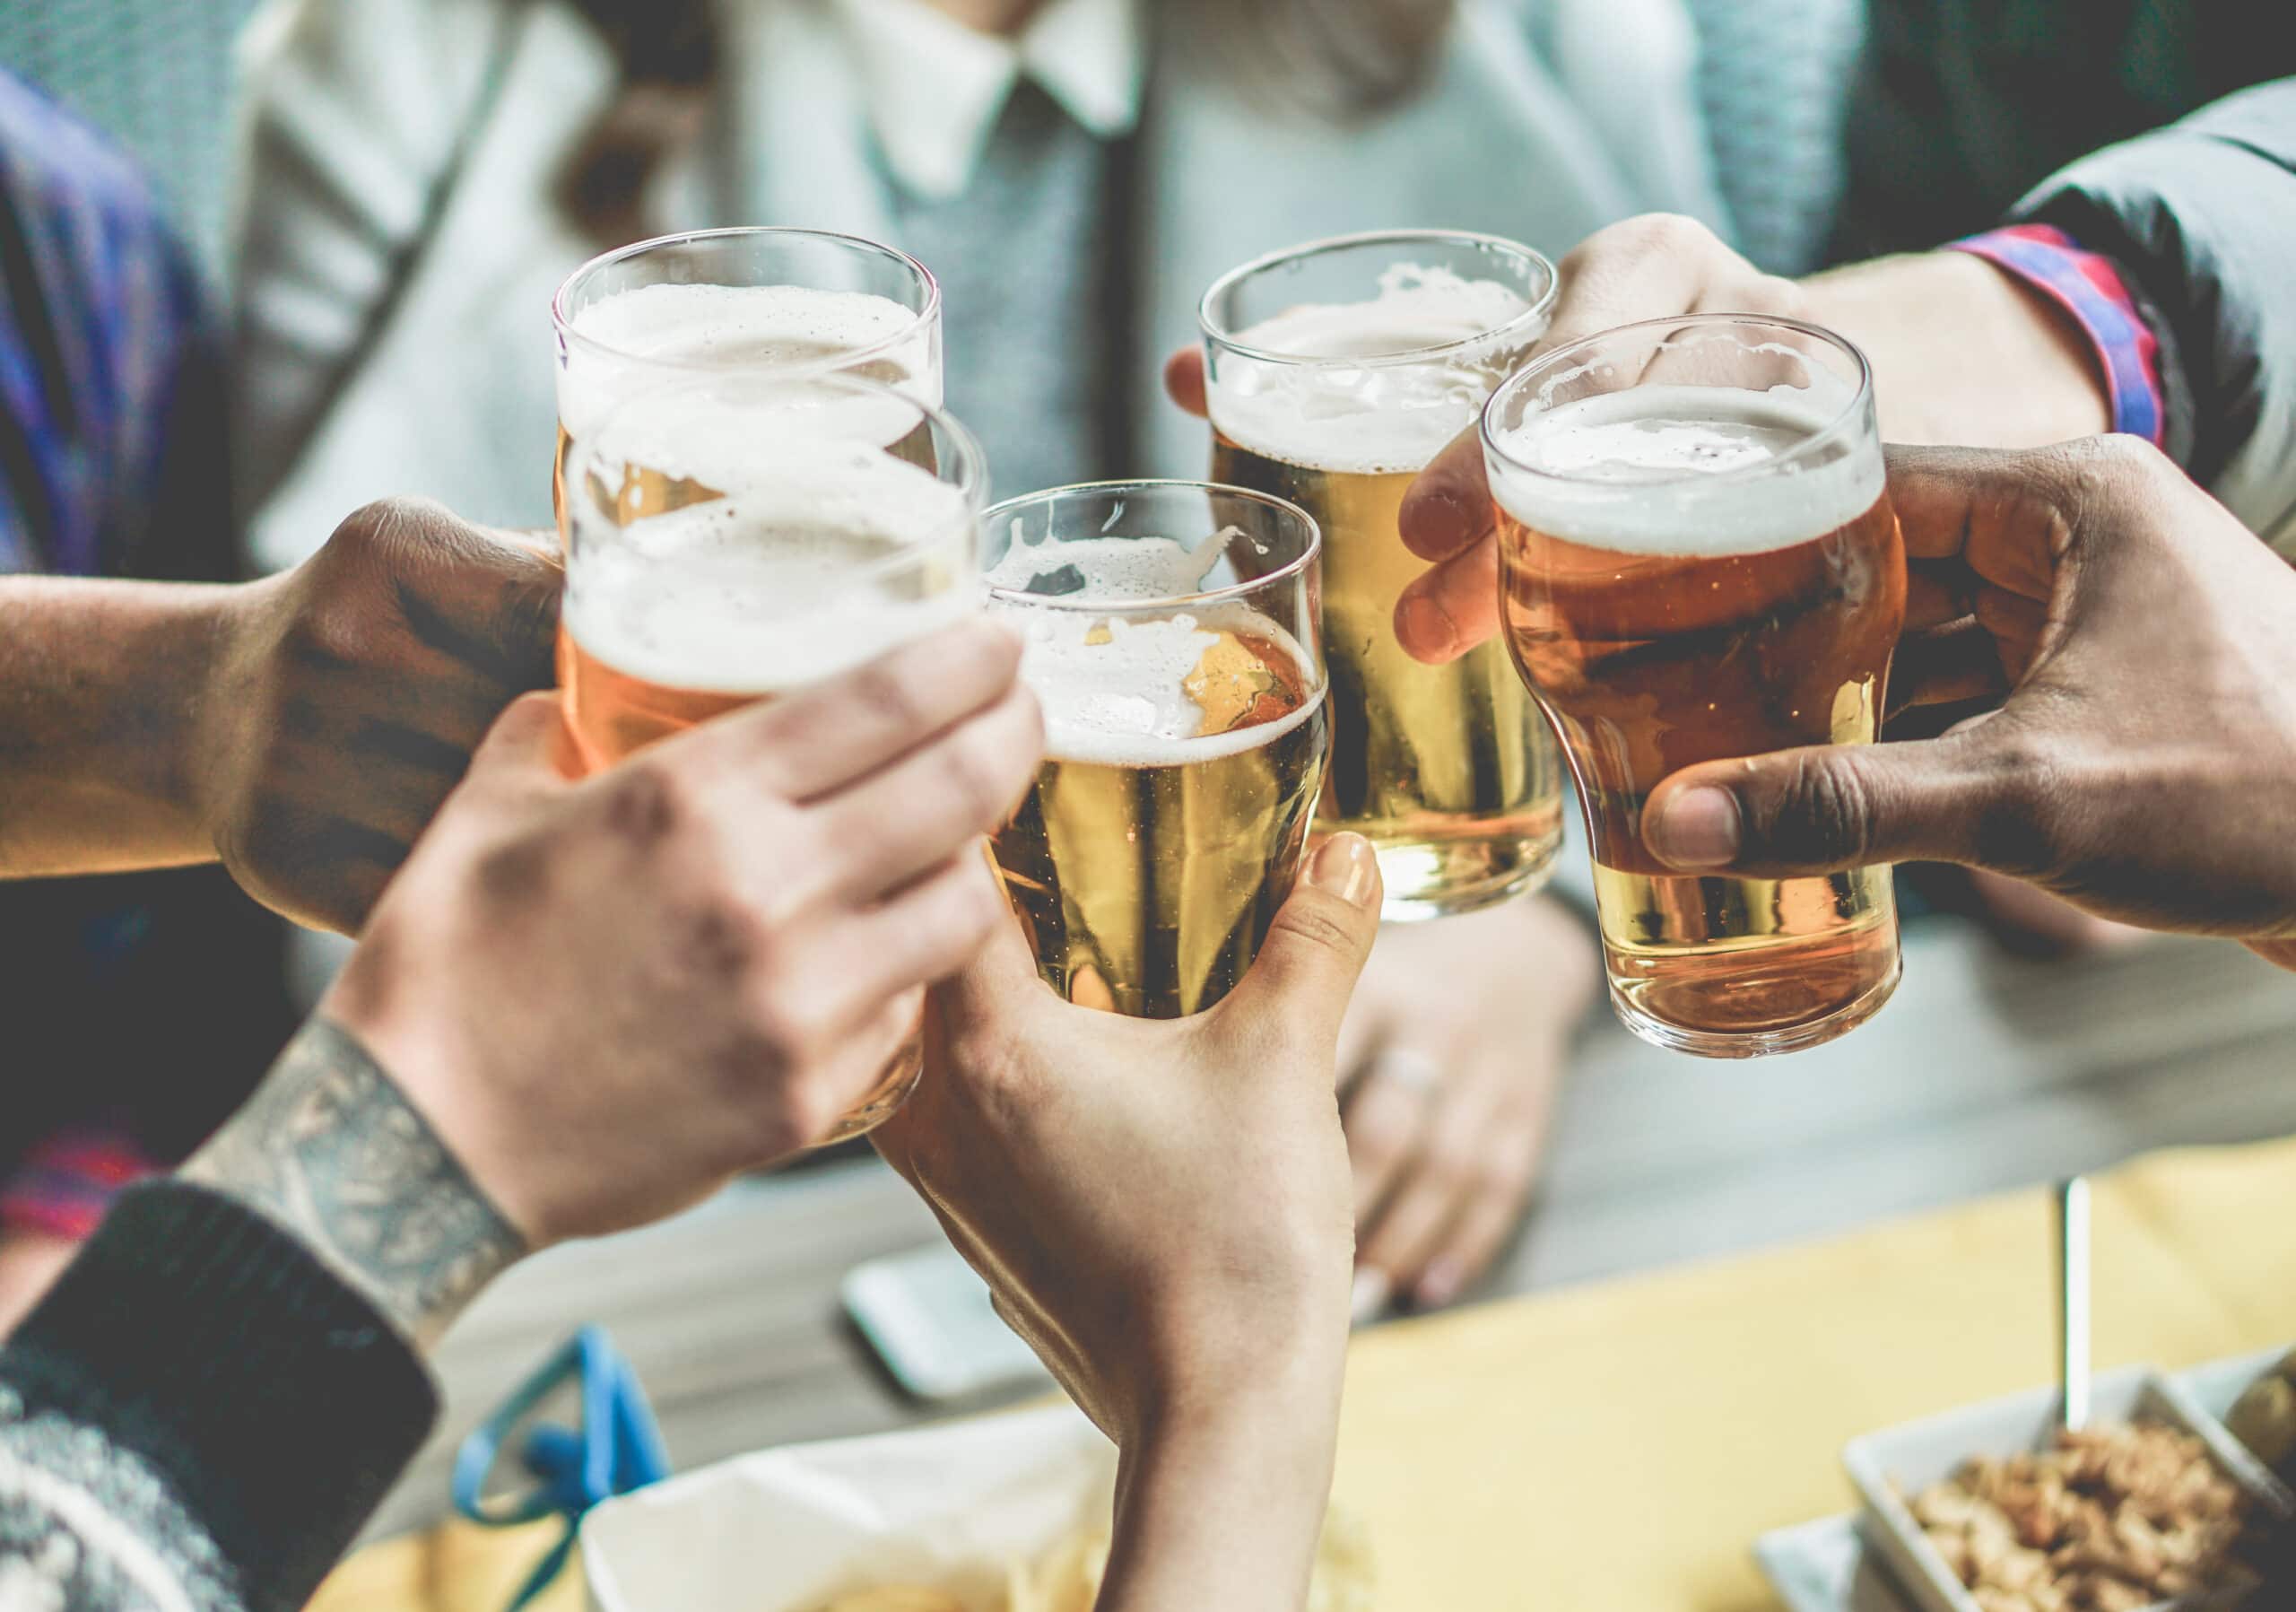 Stock image of a group of friends enjoying a beer - Start your property journey on Share to Buy!